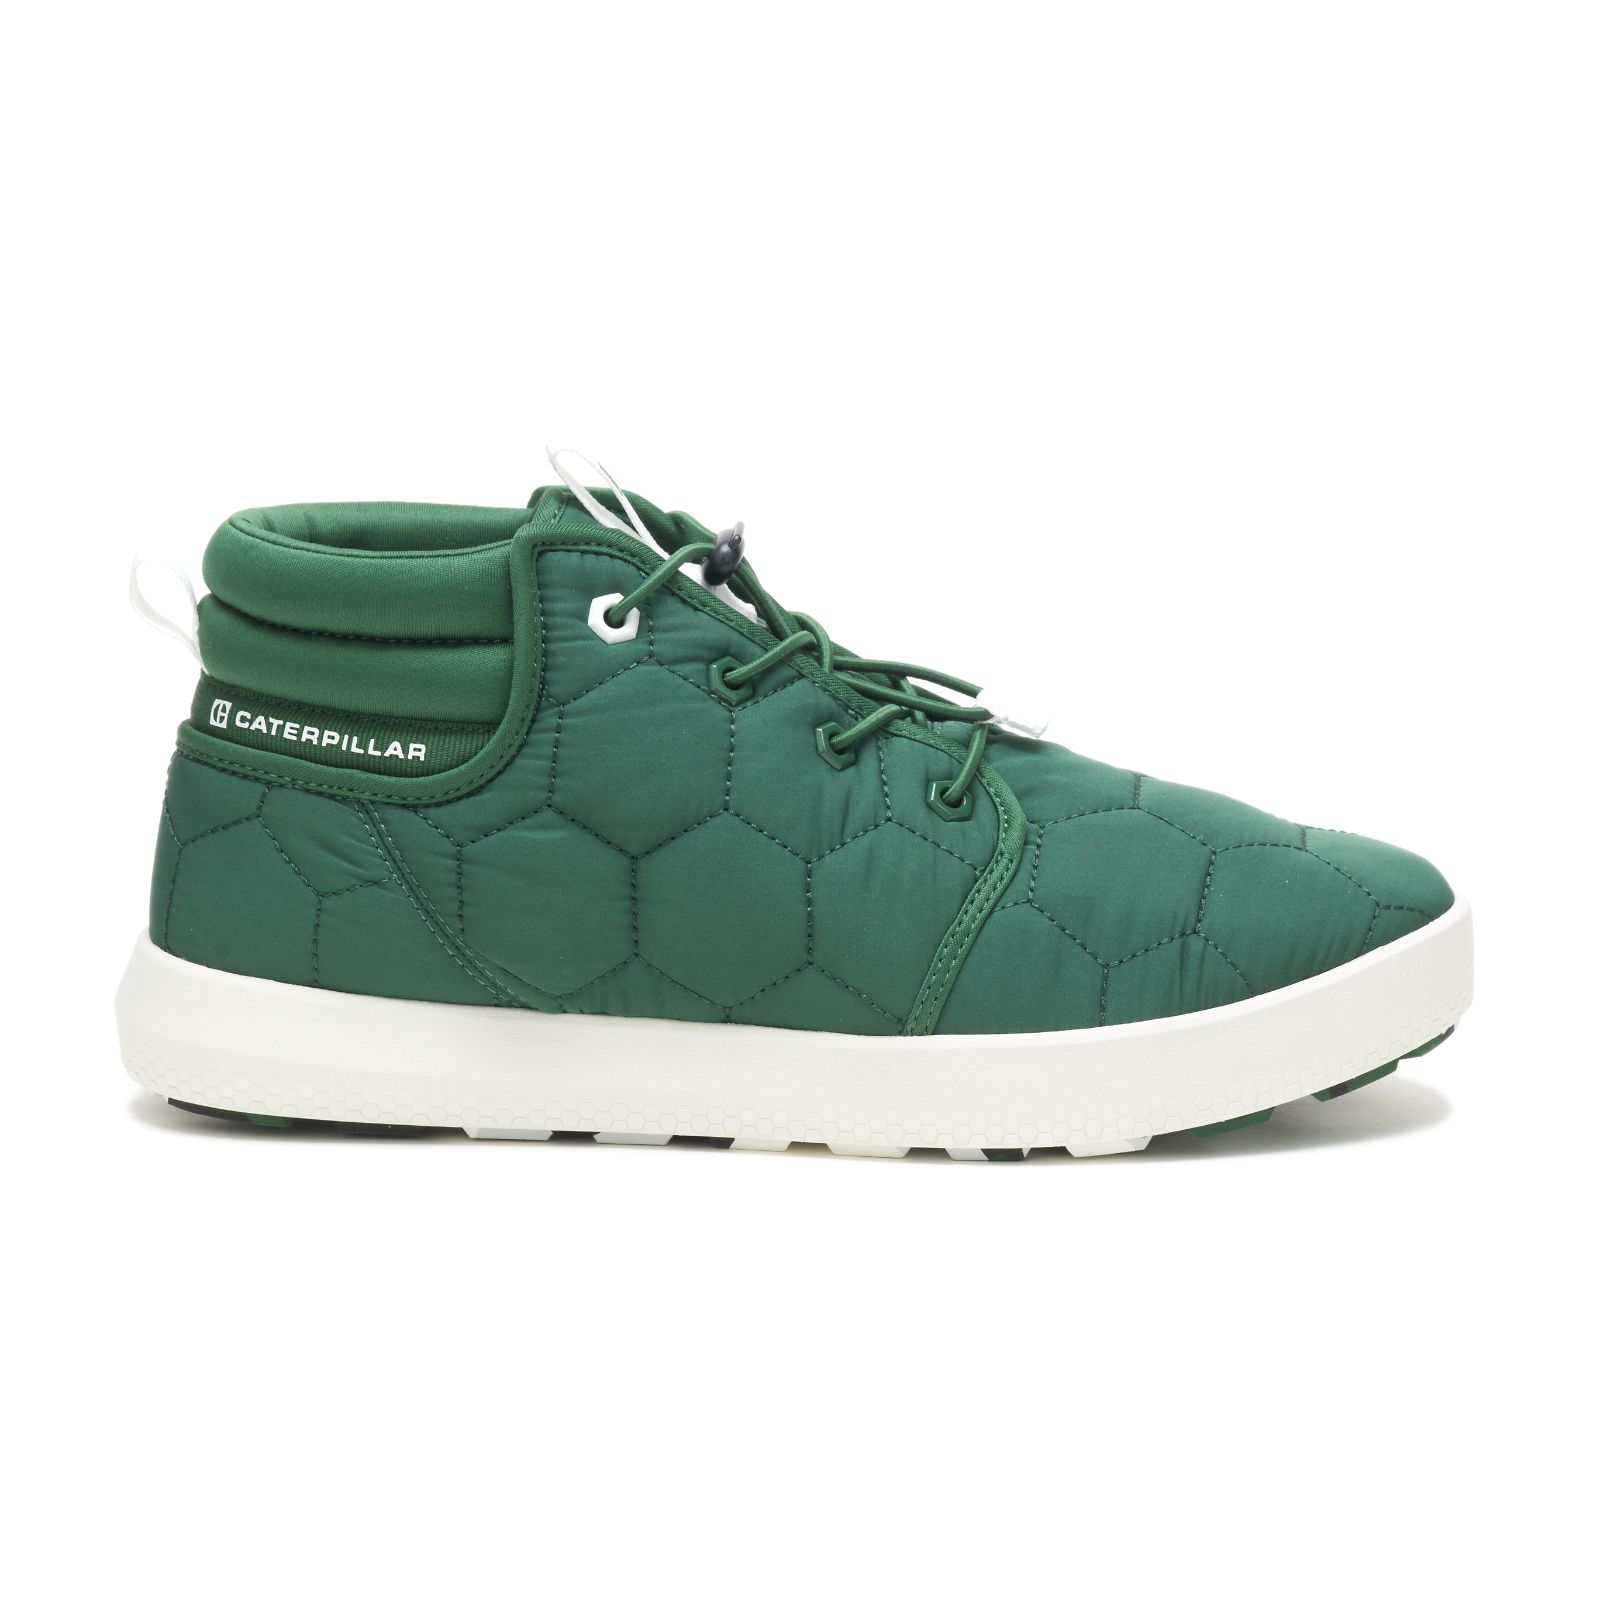 Caterpillar Code Scout Mid Philippines - Mens Trainers - Green 54368SKYP